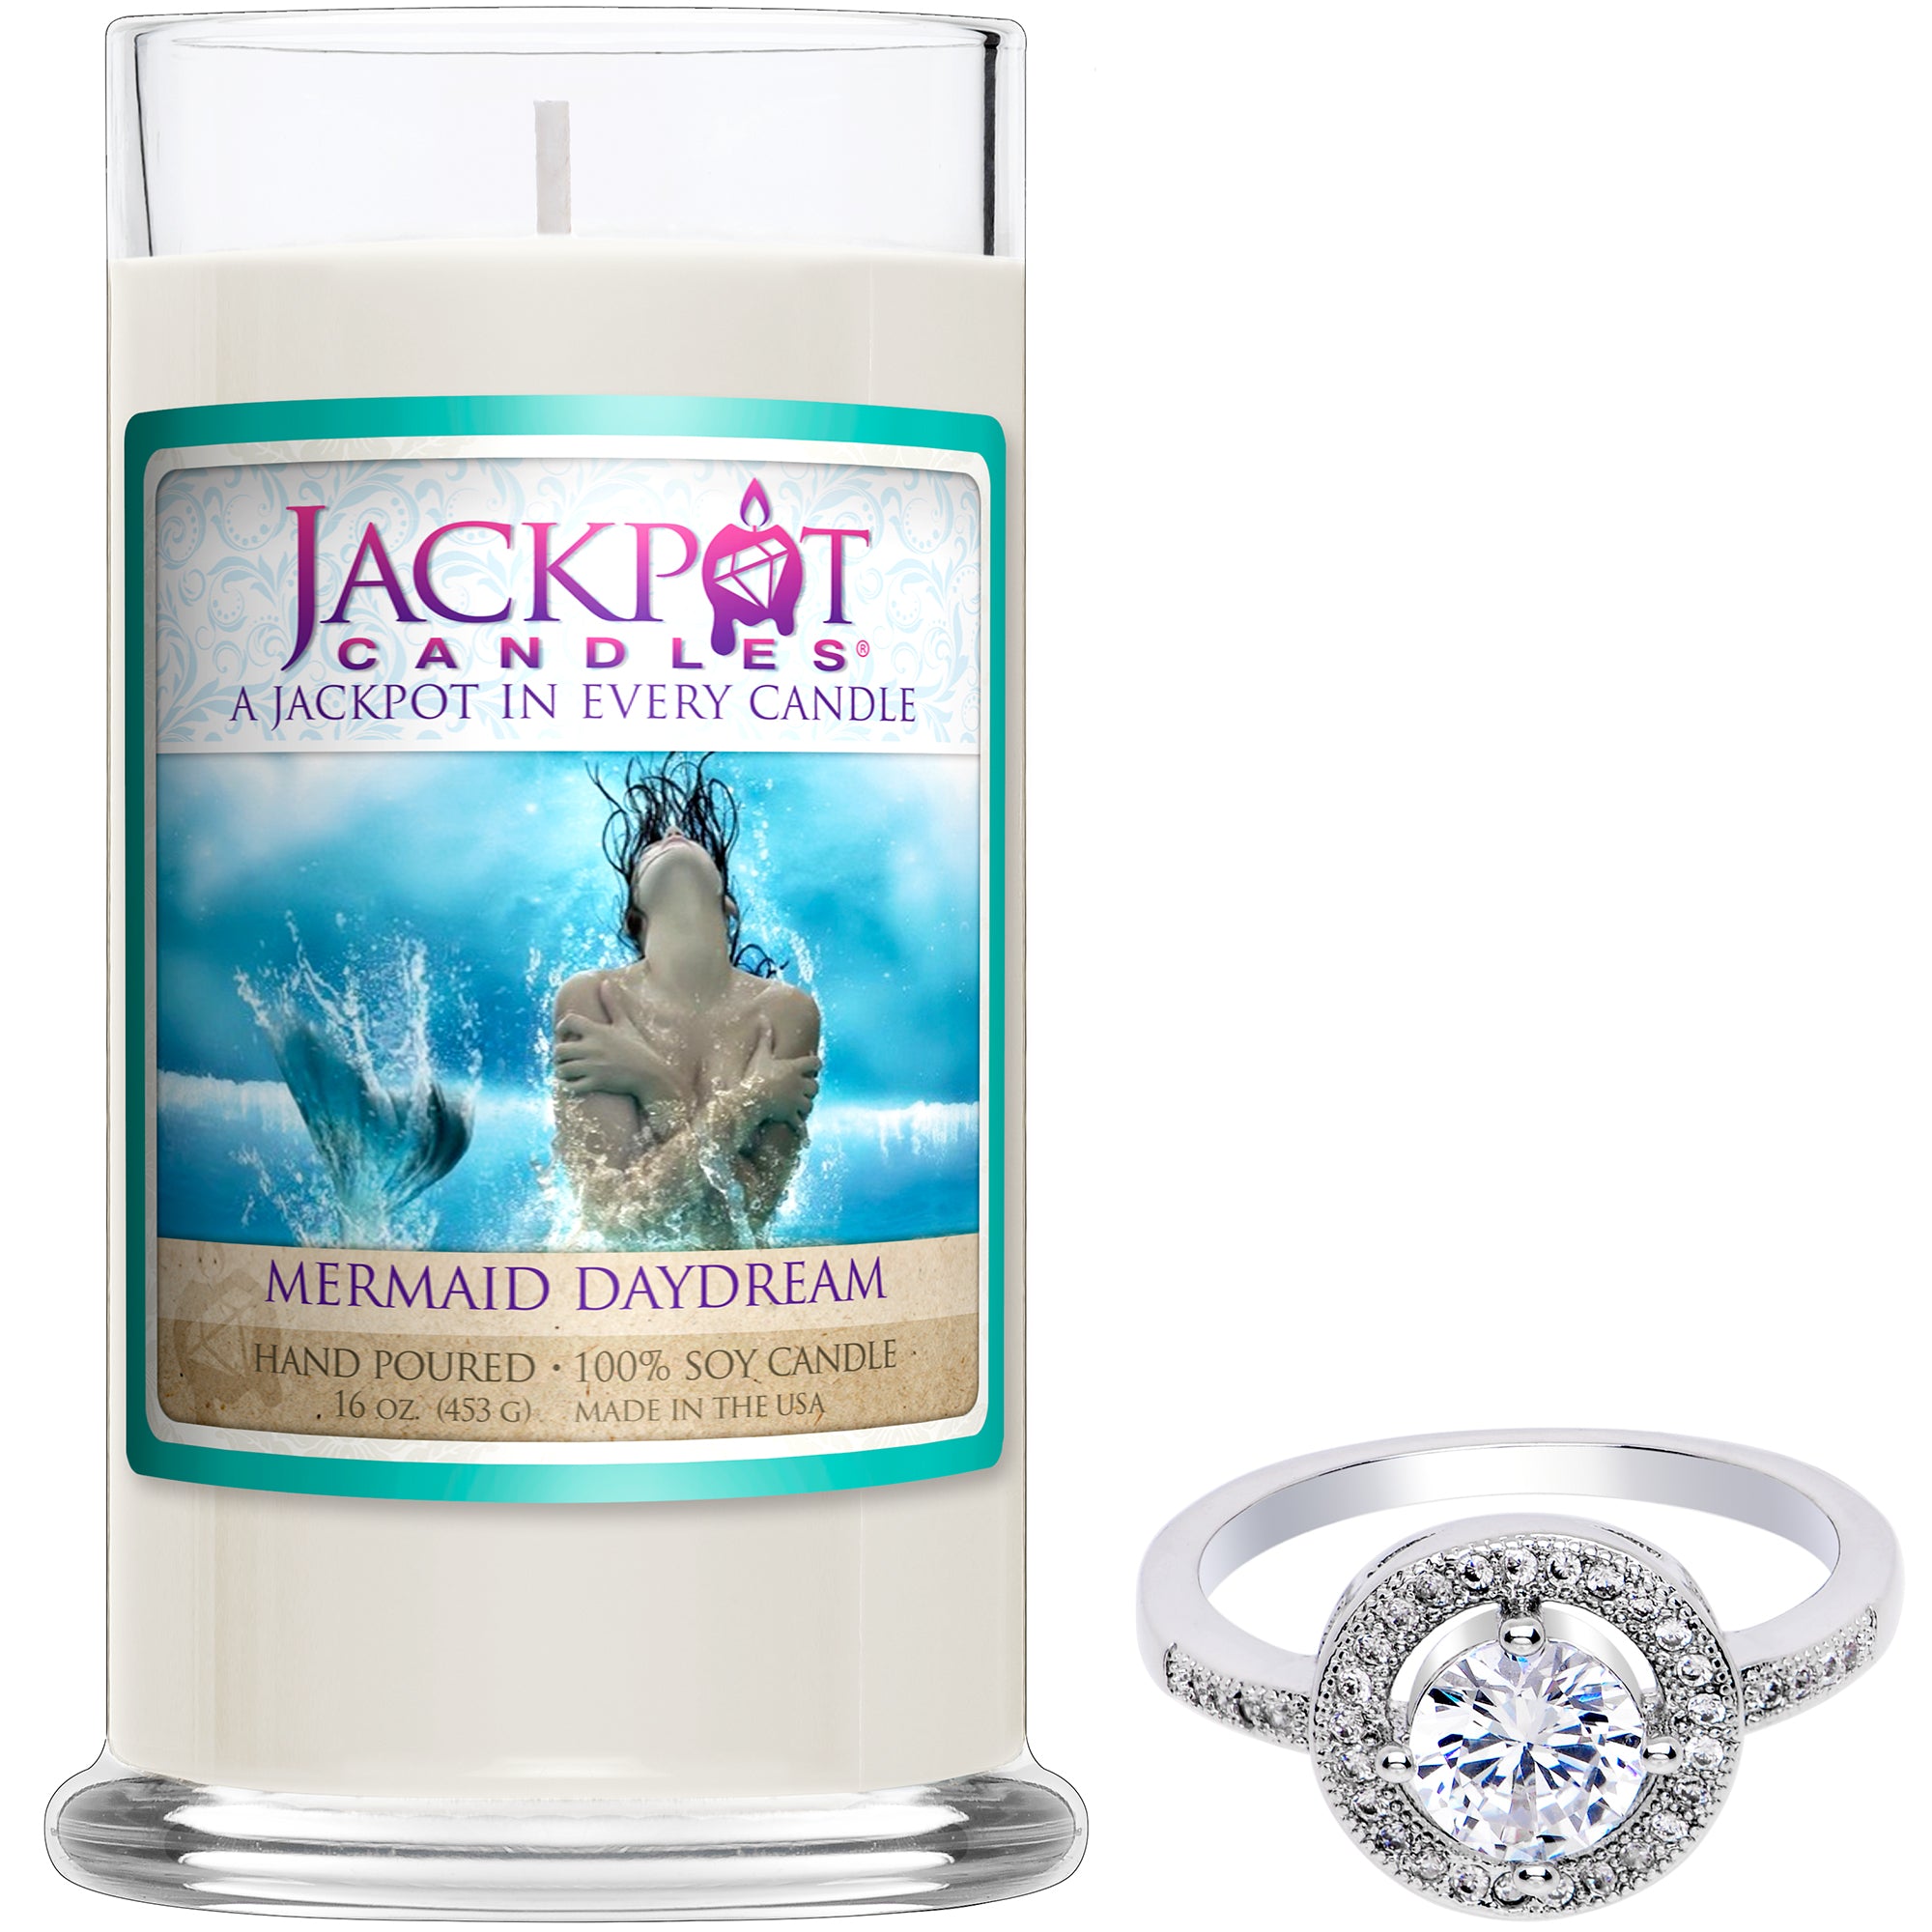 Mermaid Day Dream Candle